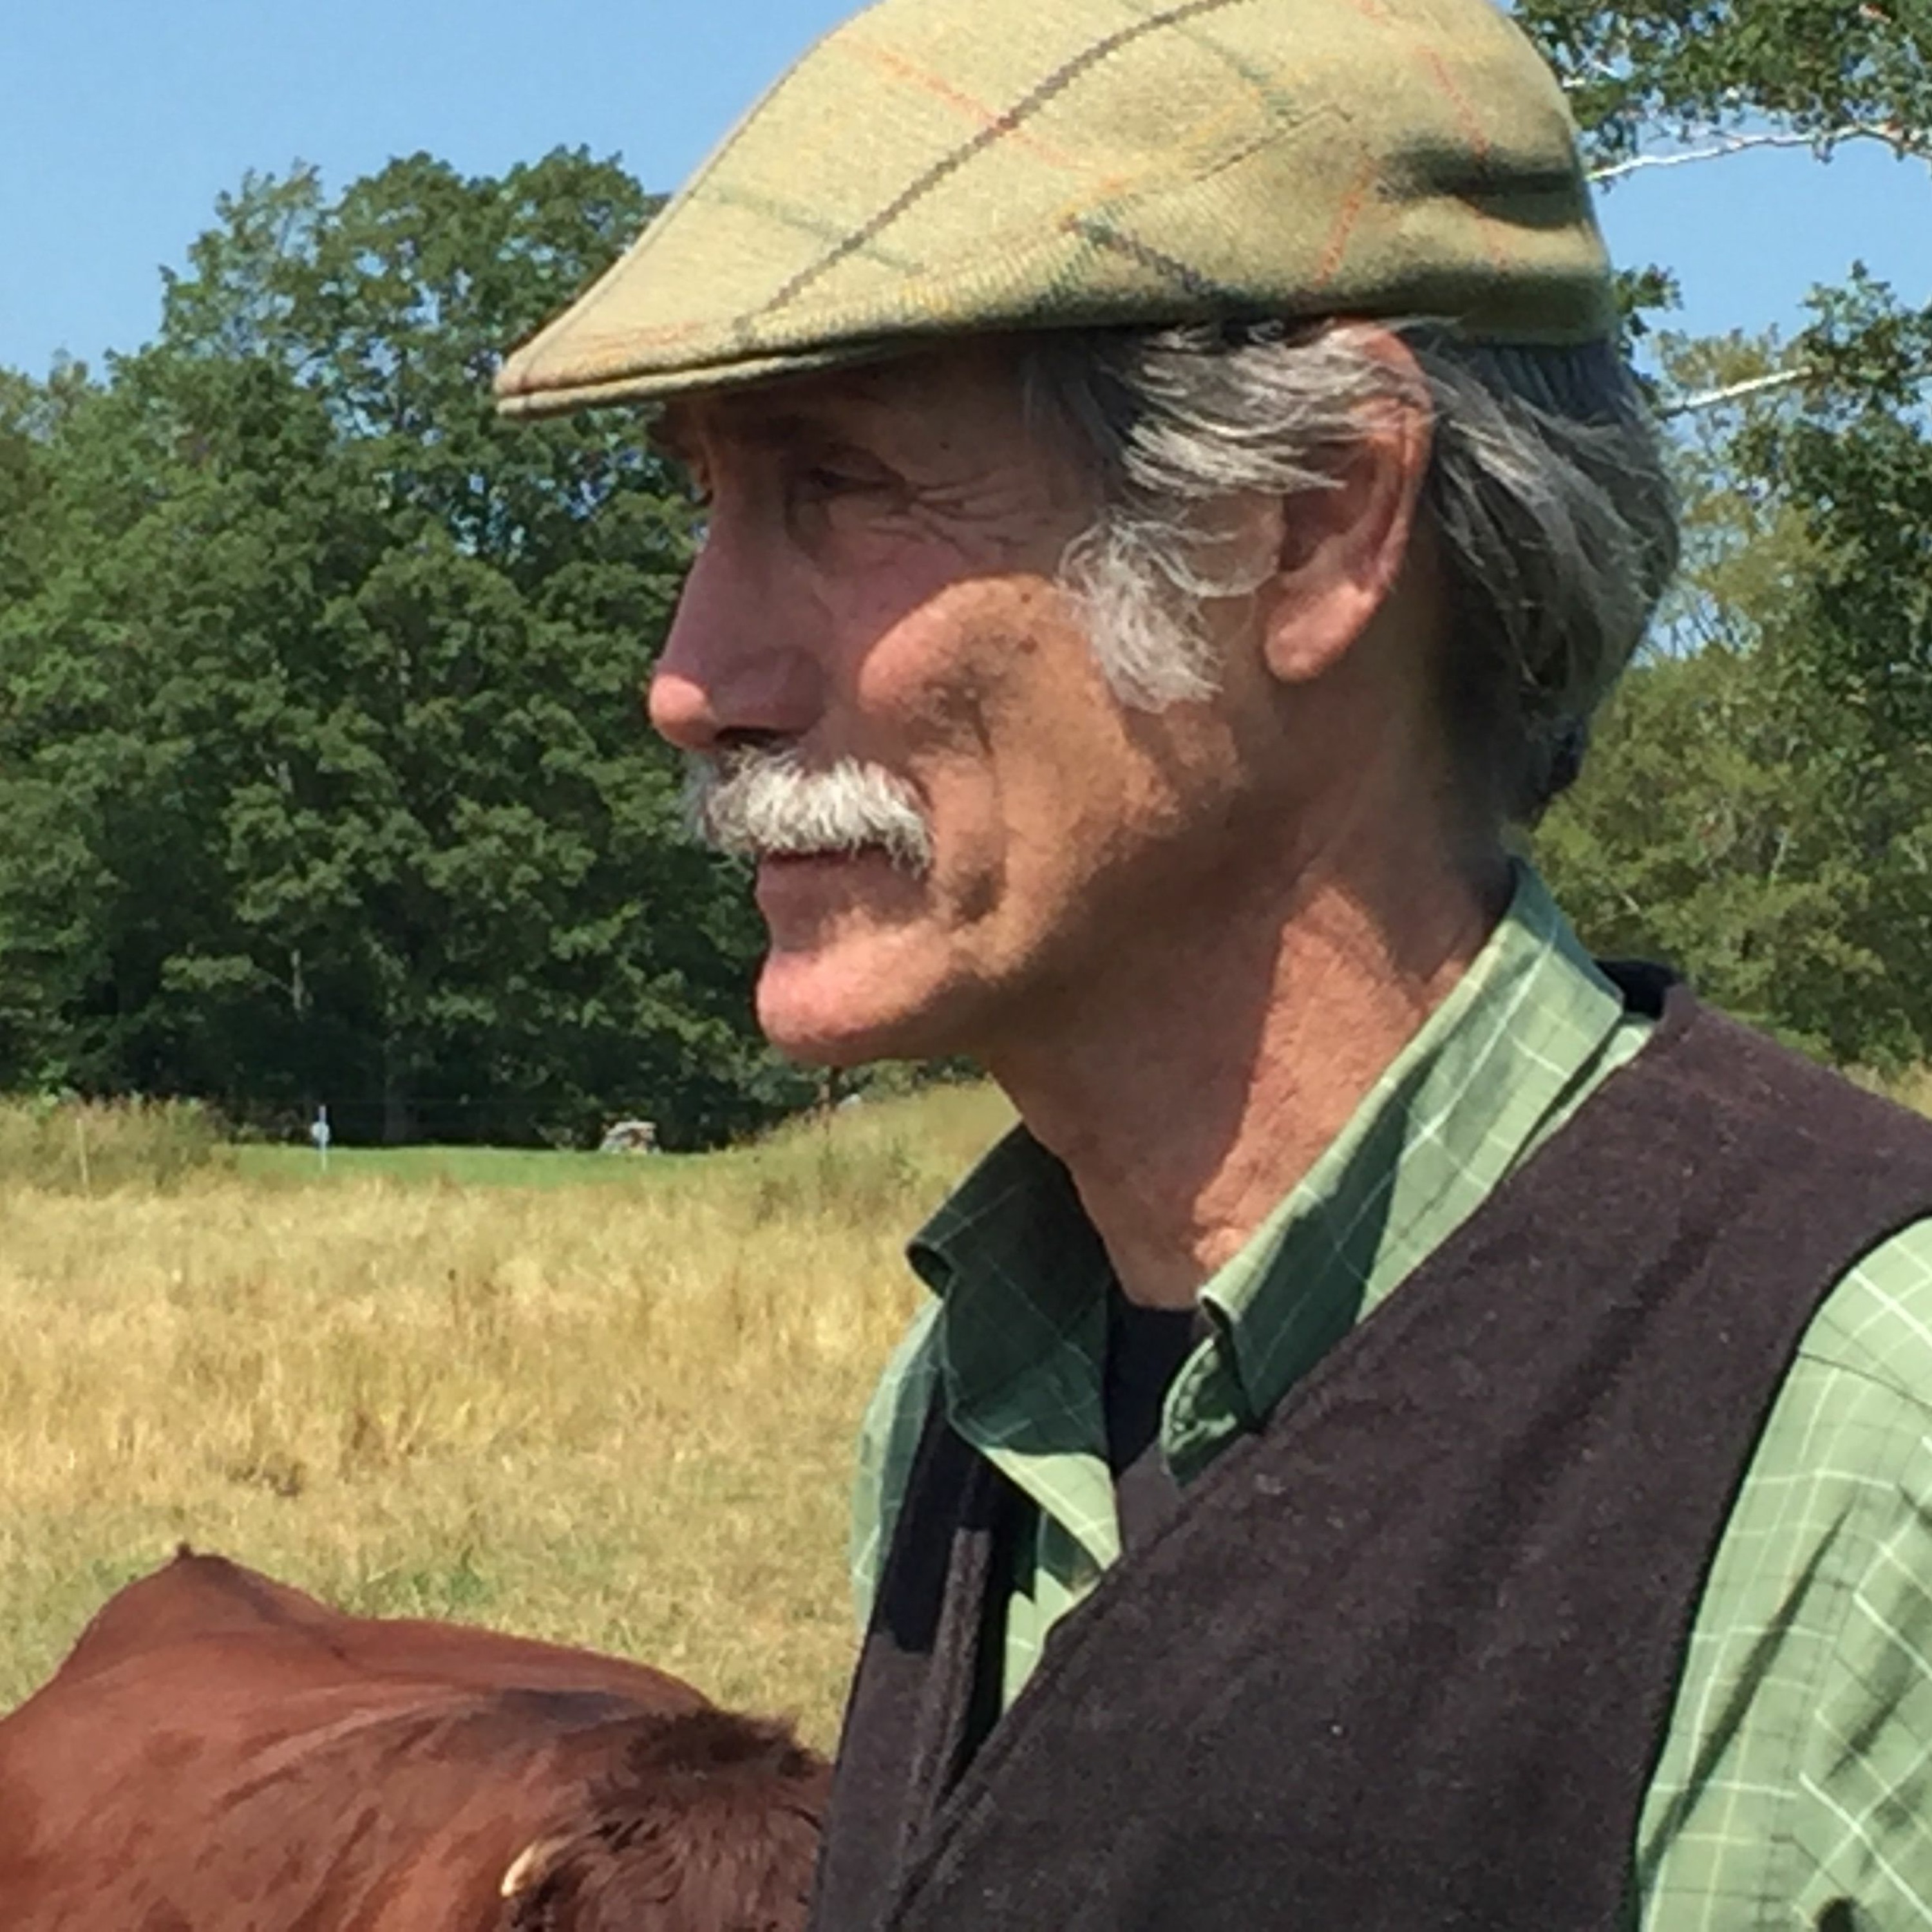 103 AgEmerge Podcast With Ridge Shinn Executive Director of the Northeast Grass-fed Beef Initiative cover art